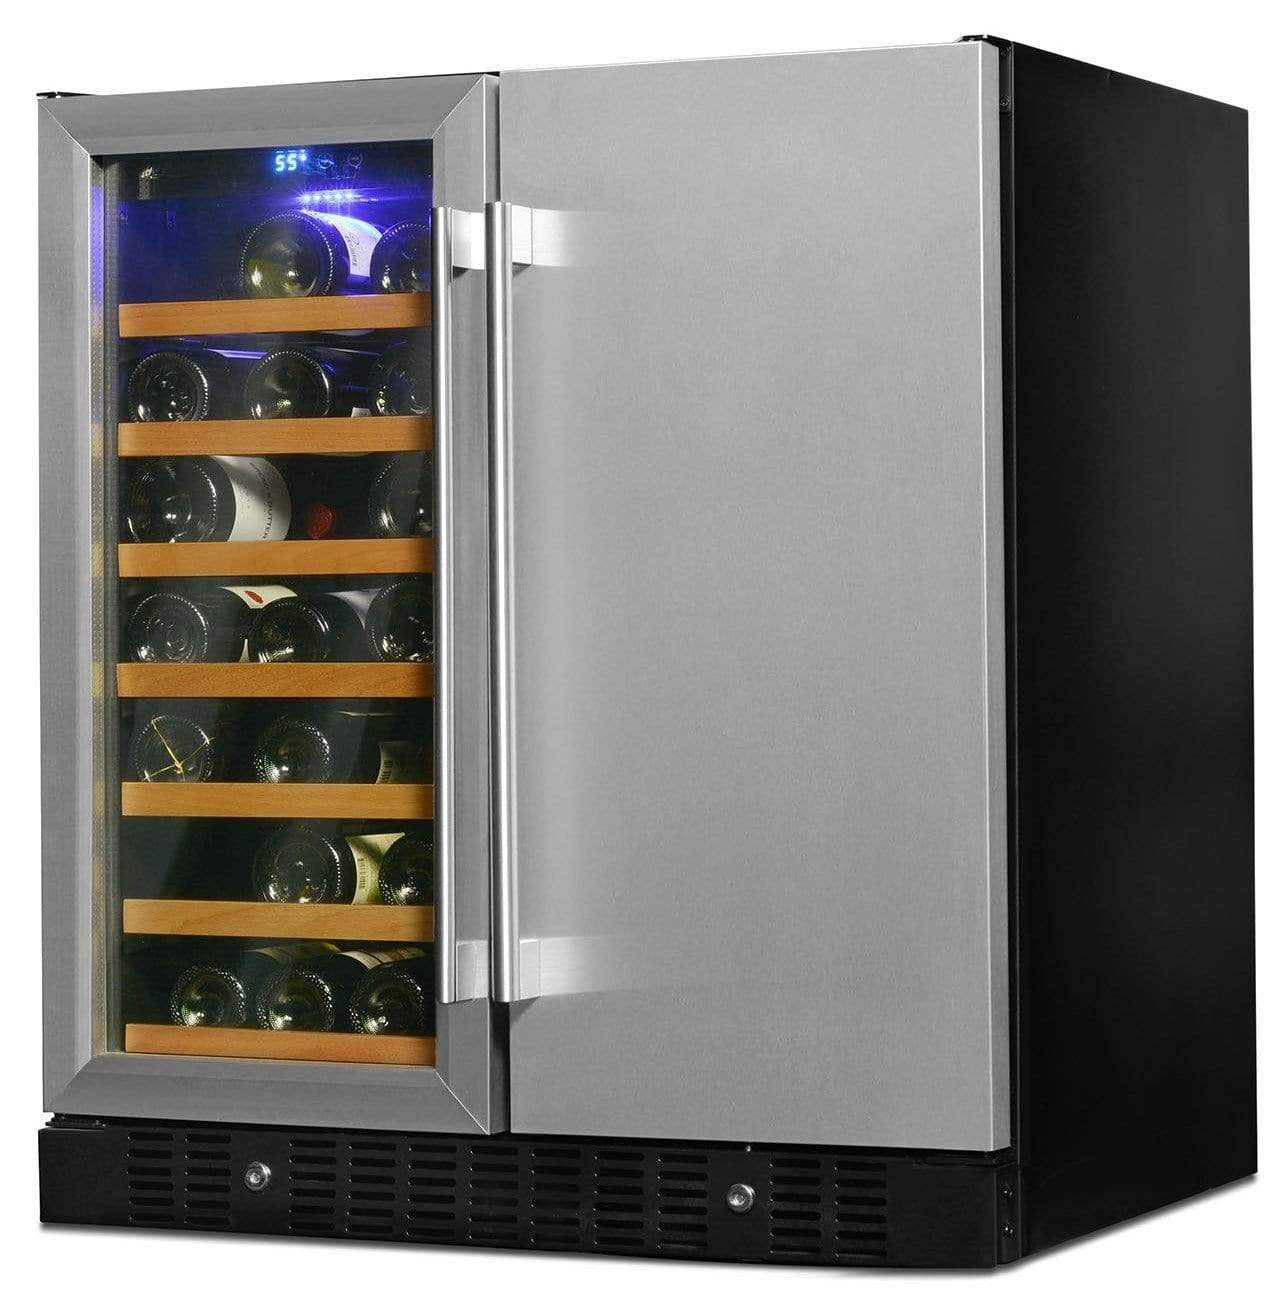 Smith & Hanks Stainless Steel Wine and Beverage Fridge BEV176SD Wine Coolers Empire